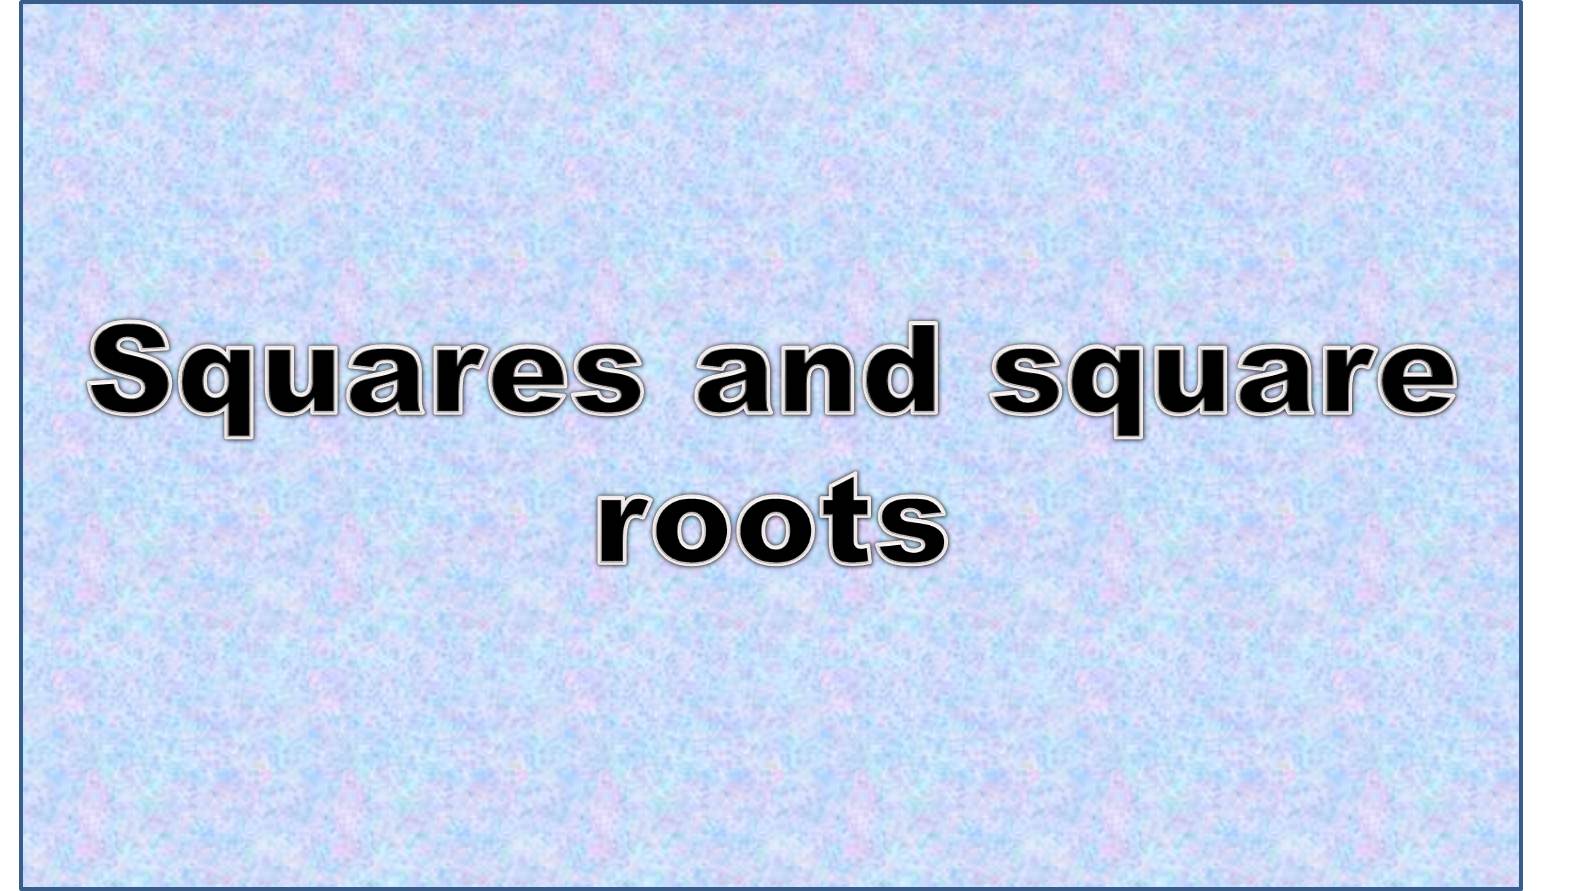 http://study.aisectonline.com/images/Simplifying square roots.jpg